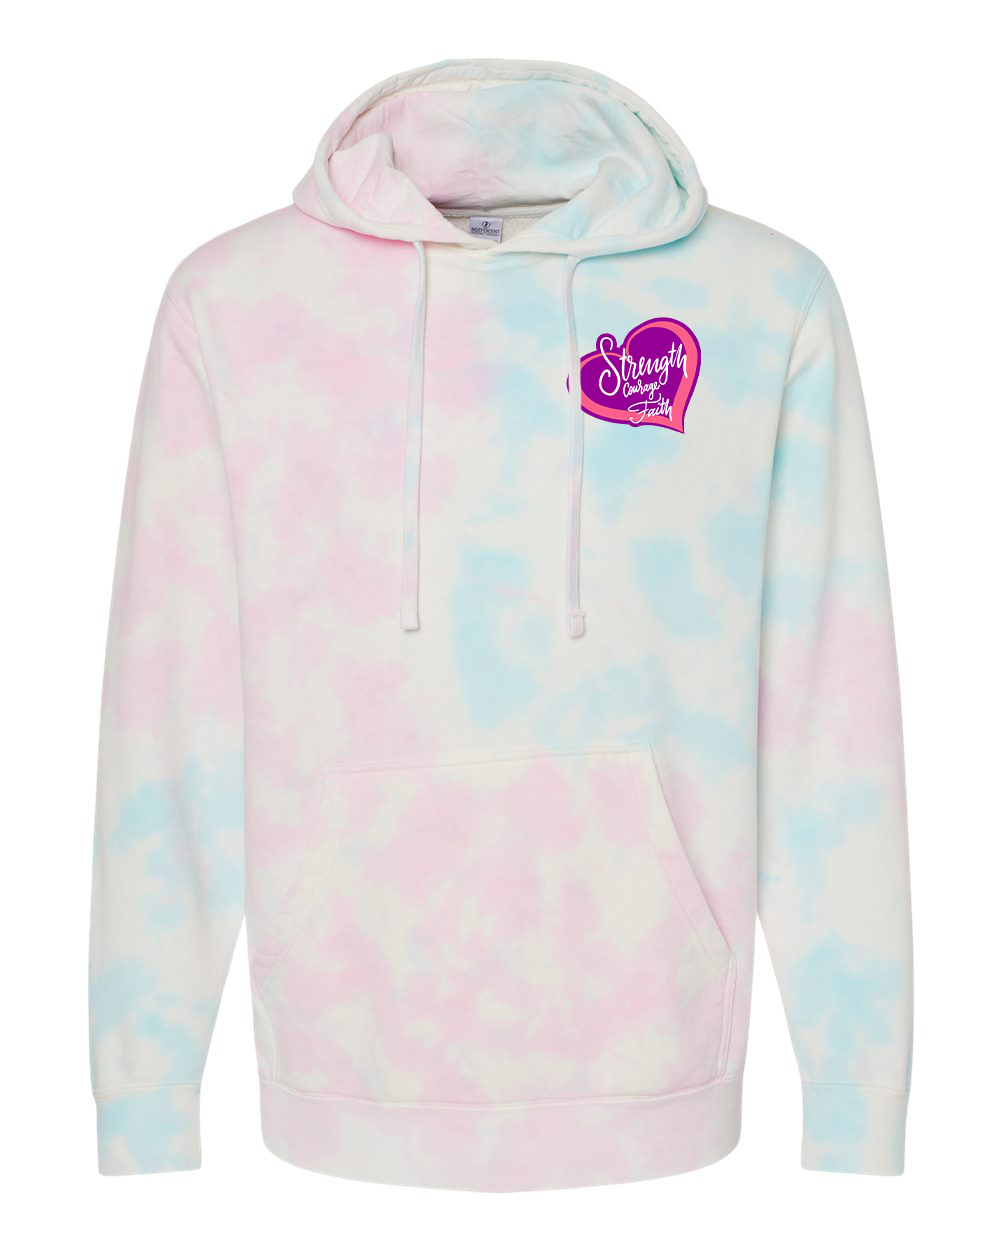 custom design of Independent Trading Co. PRM4500TD - unisex Midweight Tie Dyed Hooded Pullover